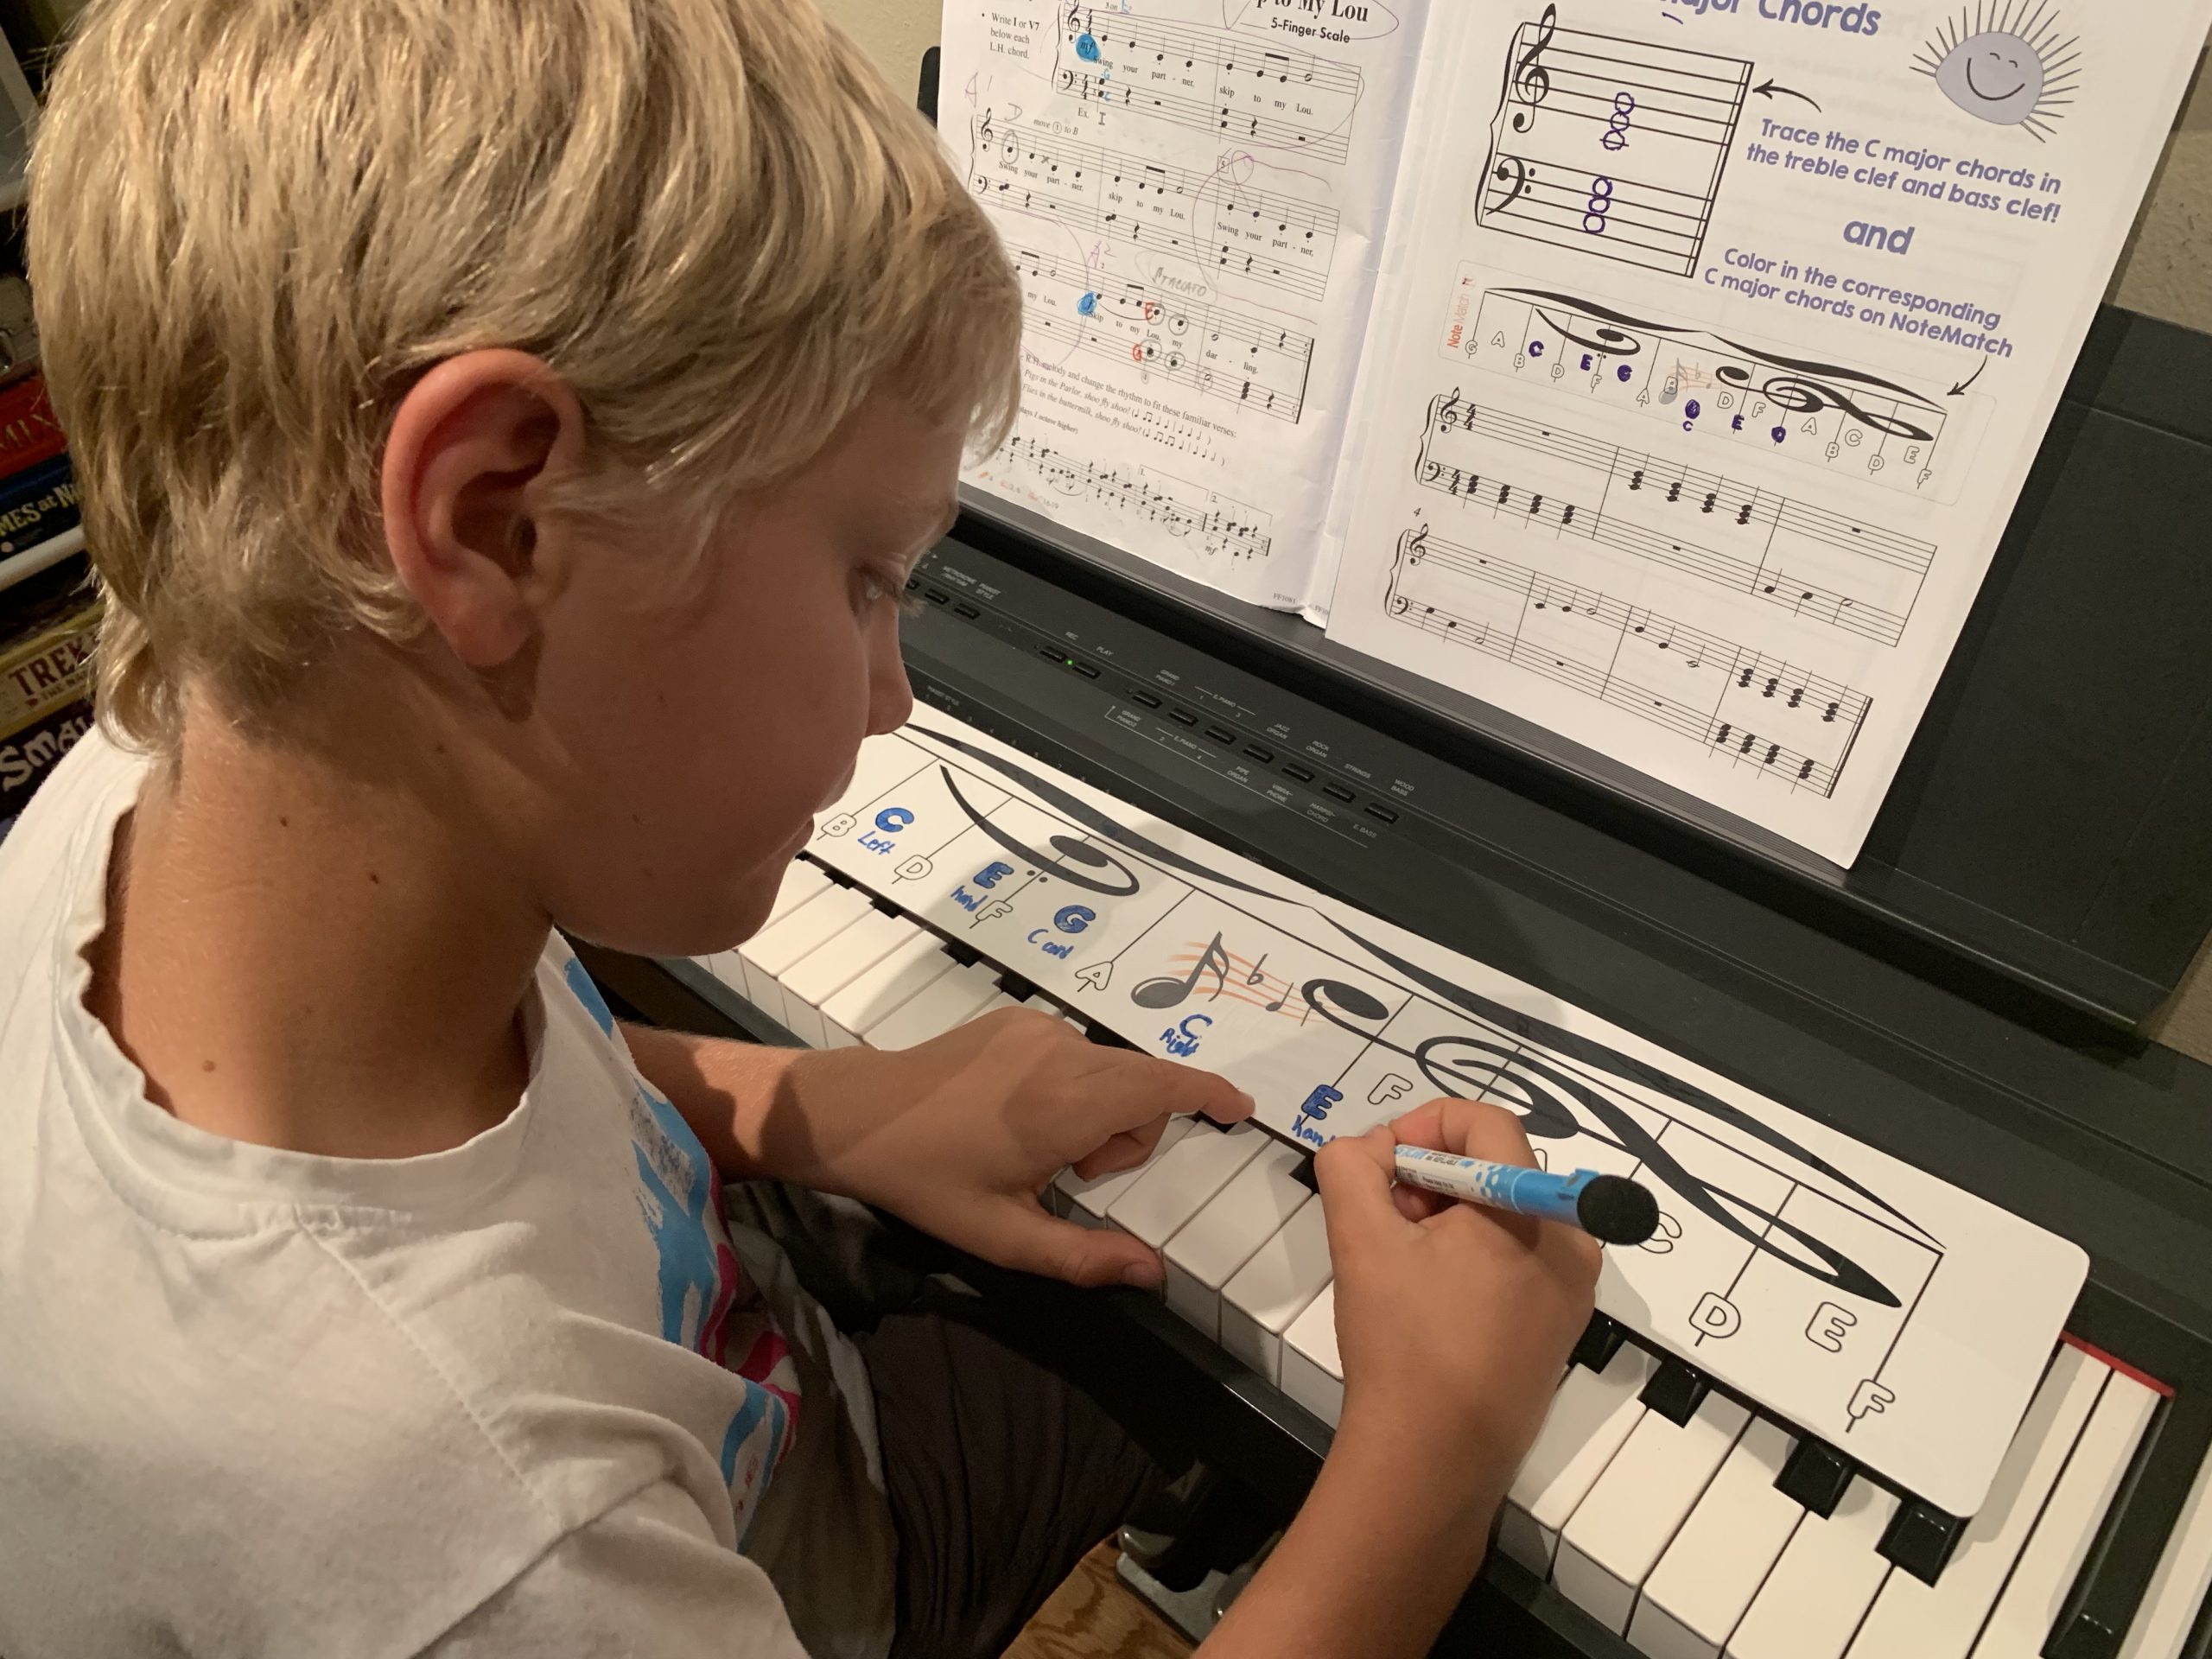 A student using notematch and the chords 1 book to learn the breakdown of a piece